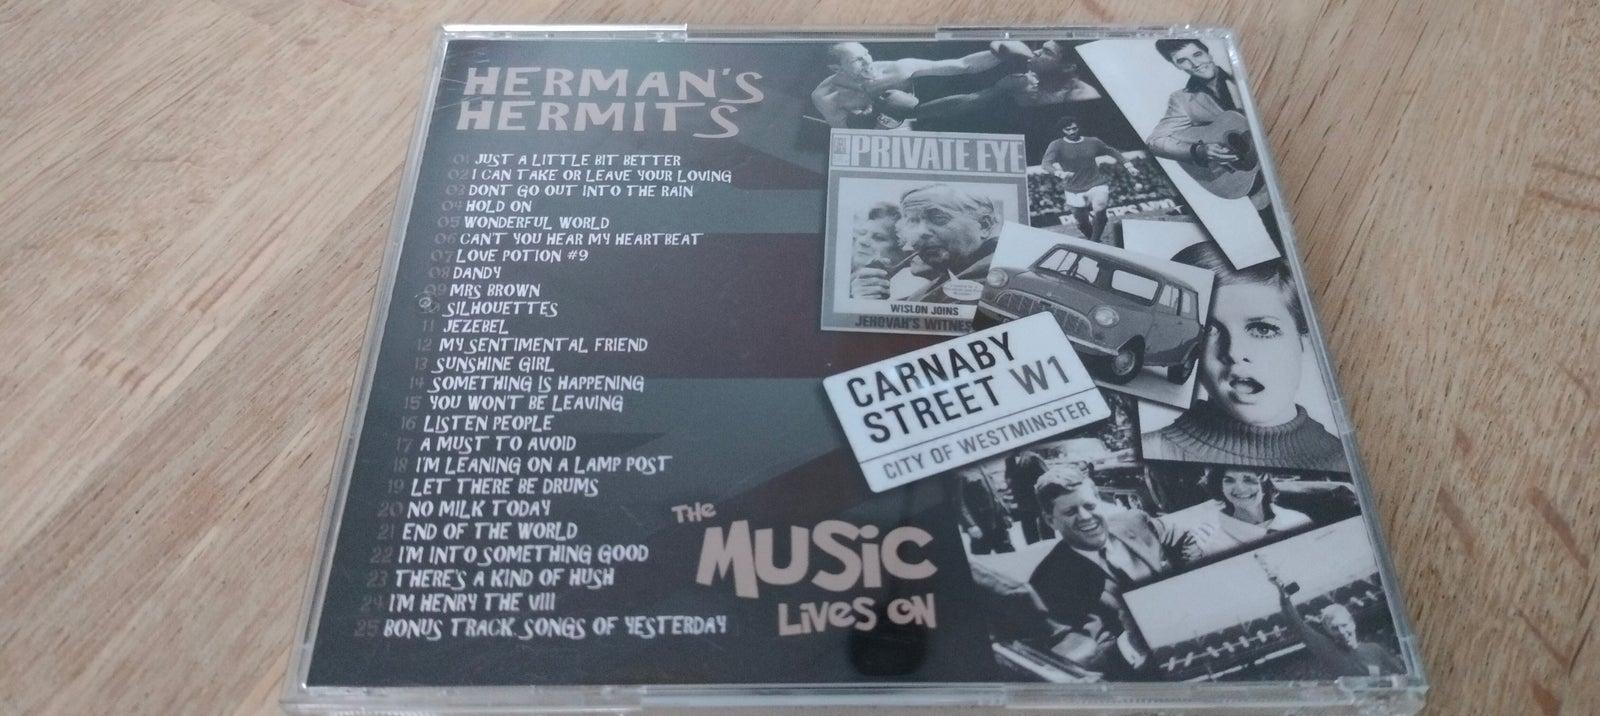 HERMAN’S HERMITS: The MUSIC Lives On, pop